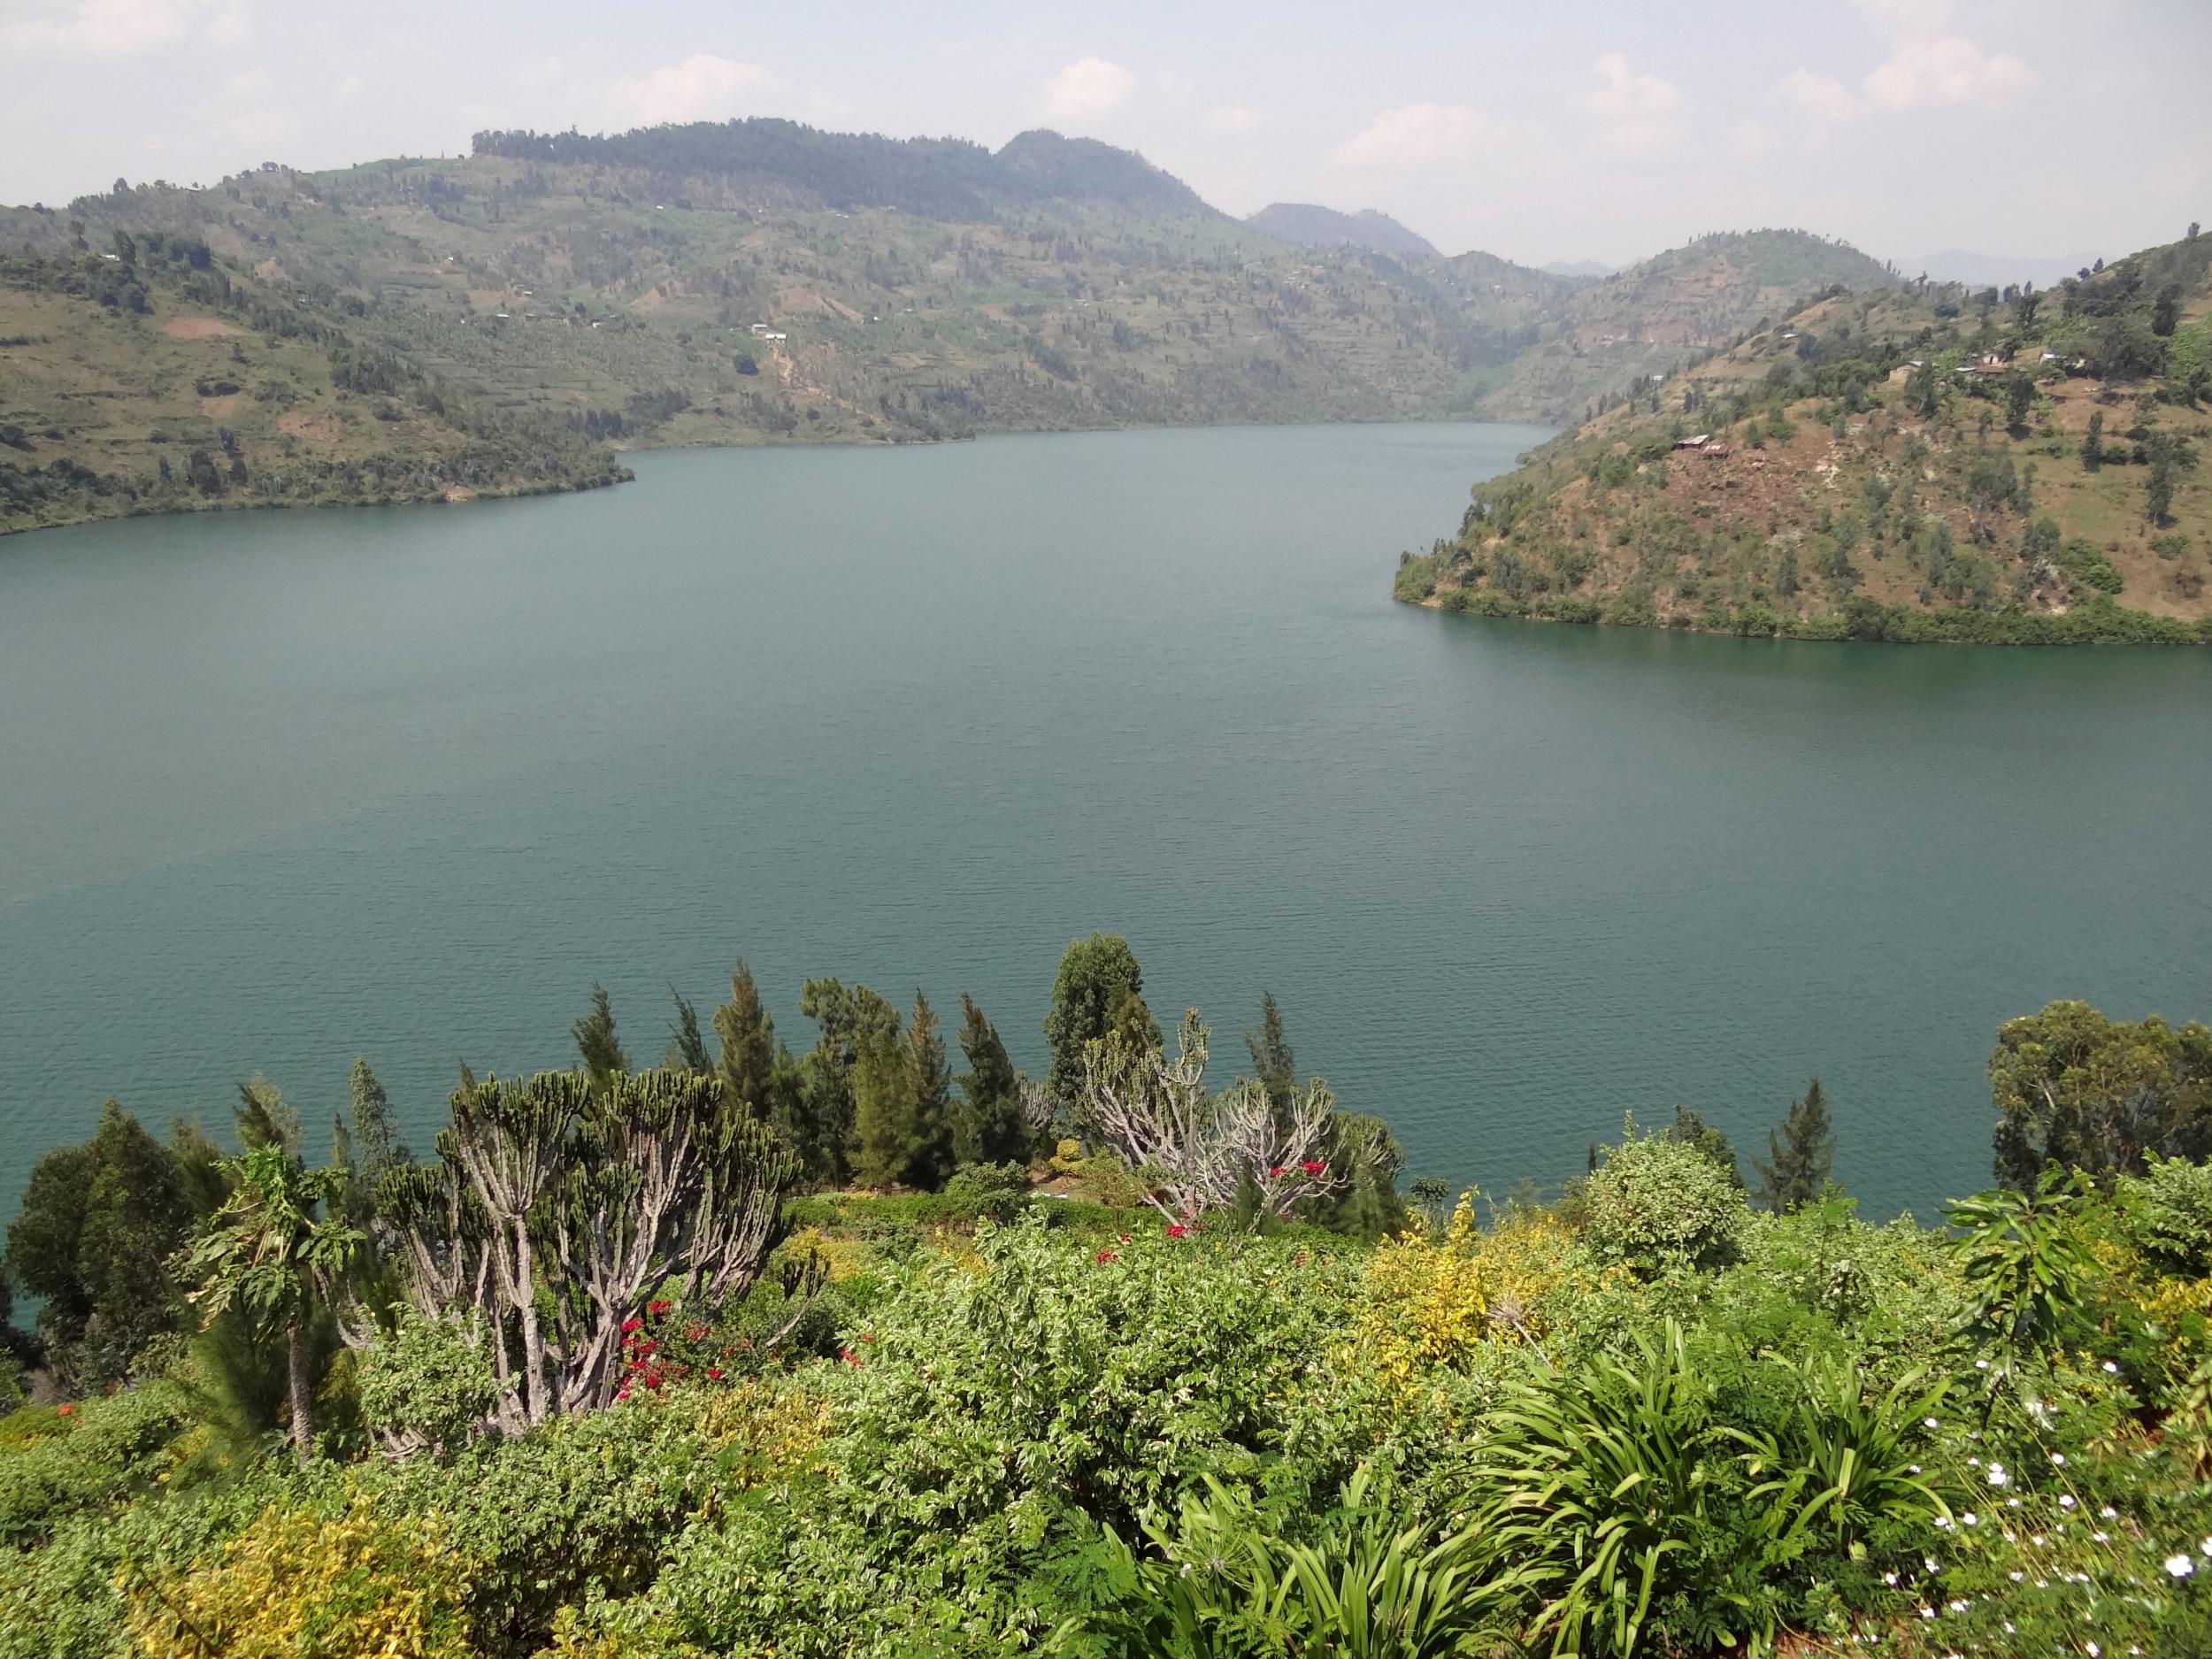 &#13;
Trapped gas building up beneath lakes like this one in Rwanda create volcanic activity known as 'exploding lakes' &#13;